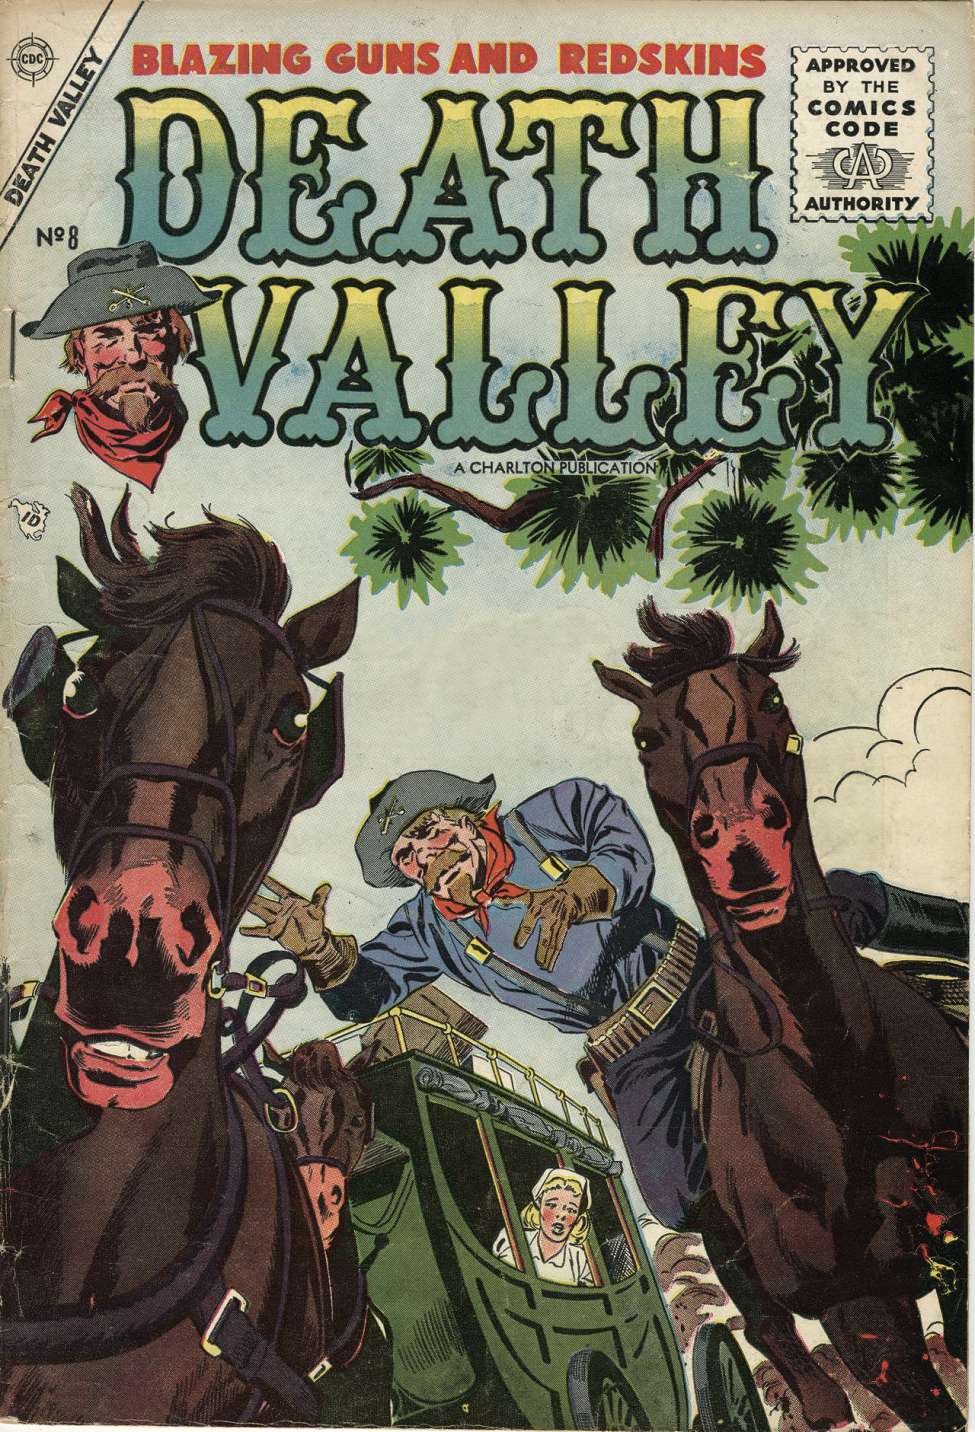 Comic Book Cover For Death Valley 8 - Version 2